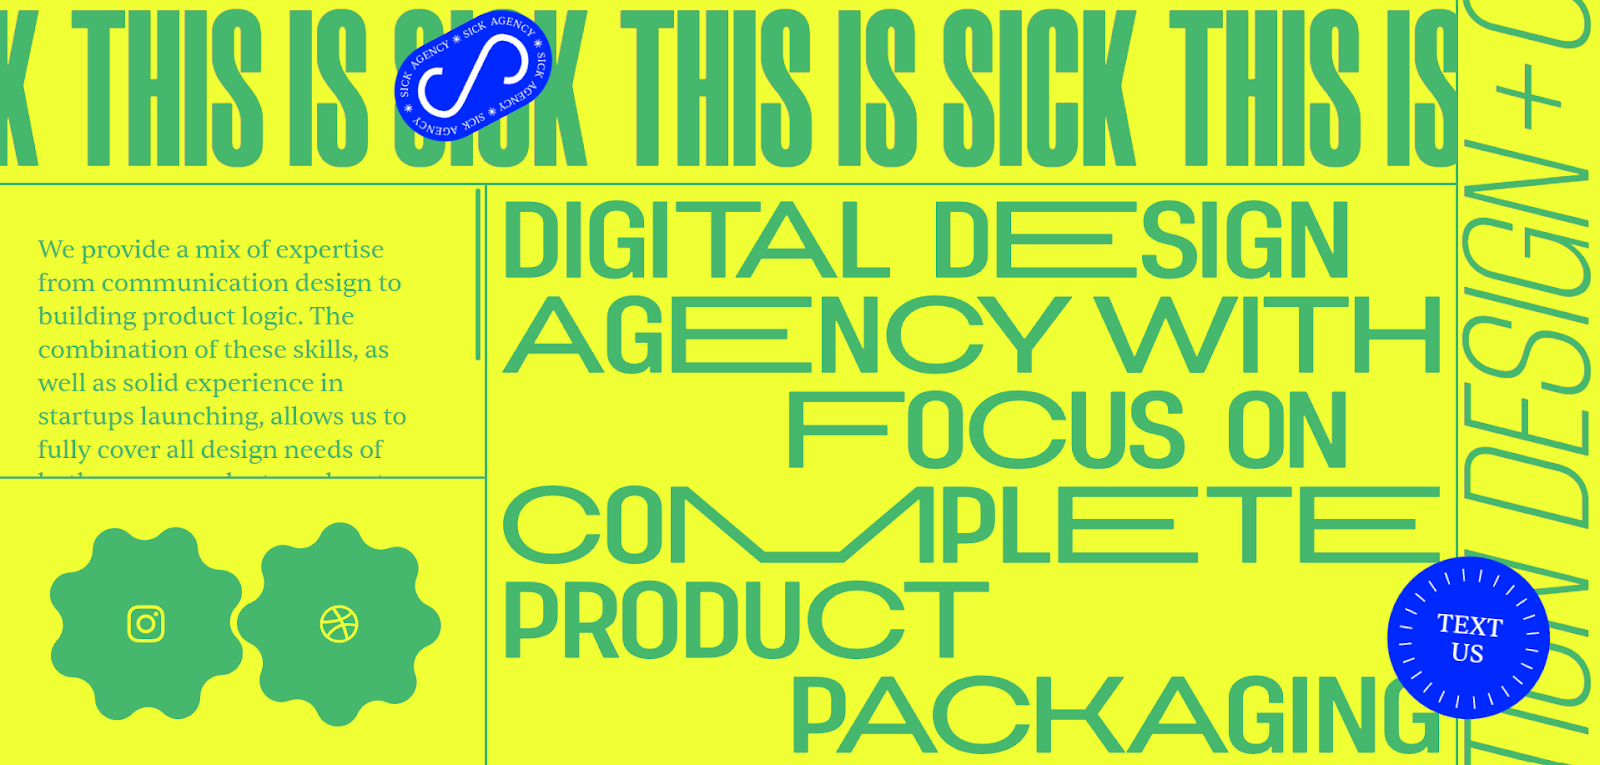 futuristic websites, example from sick agency